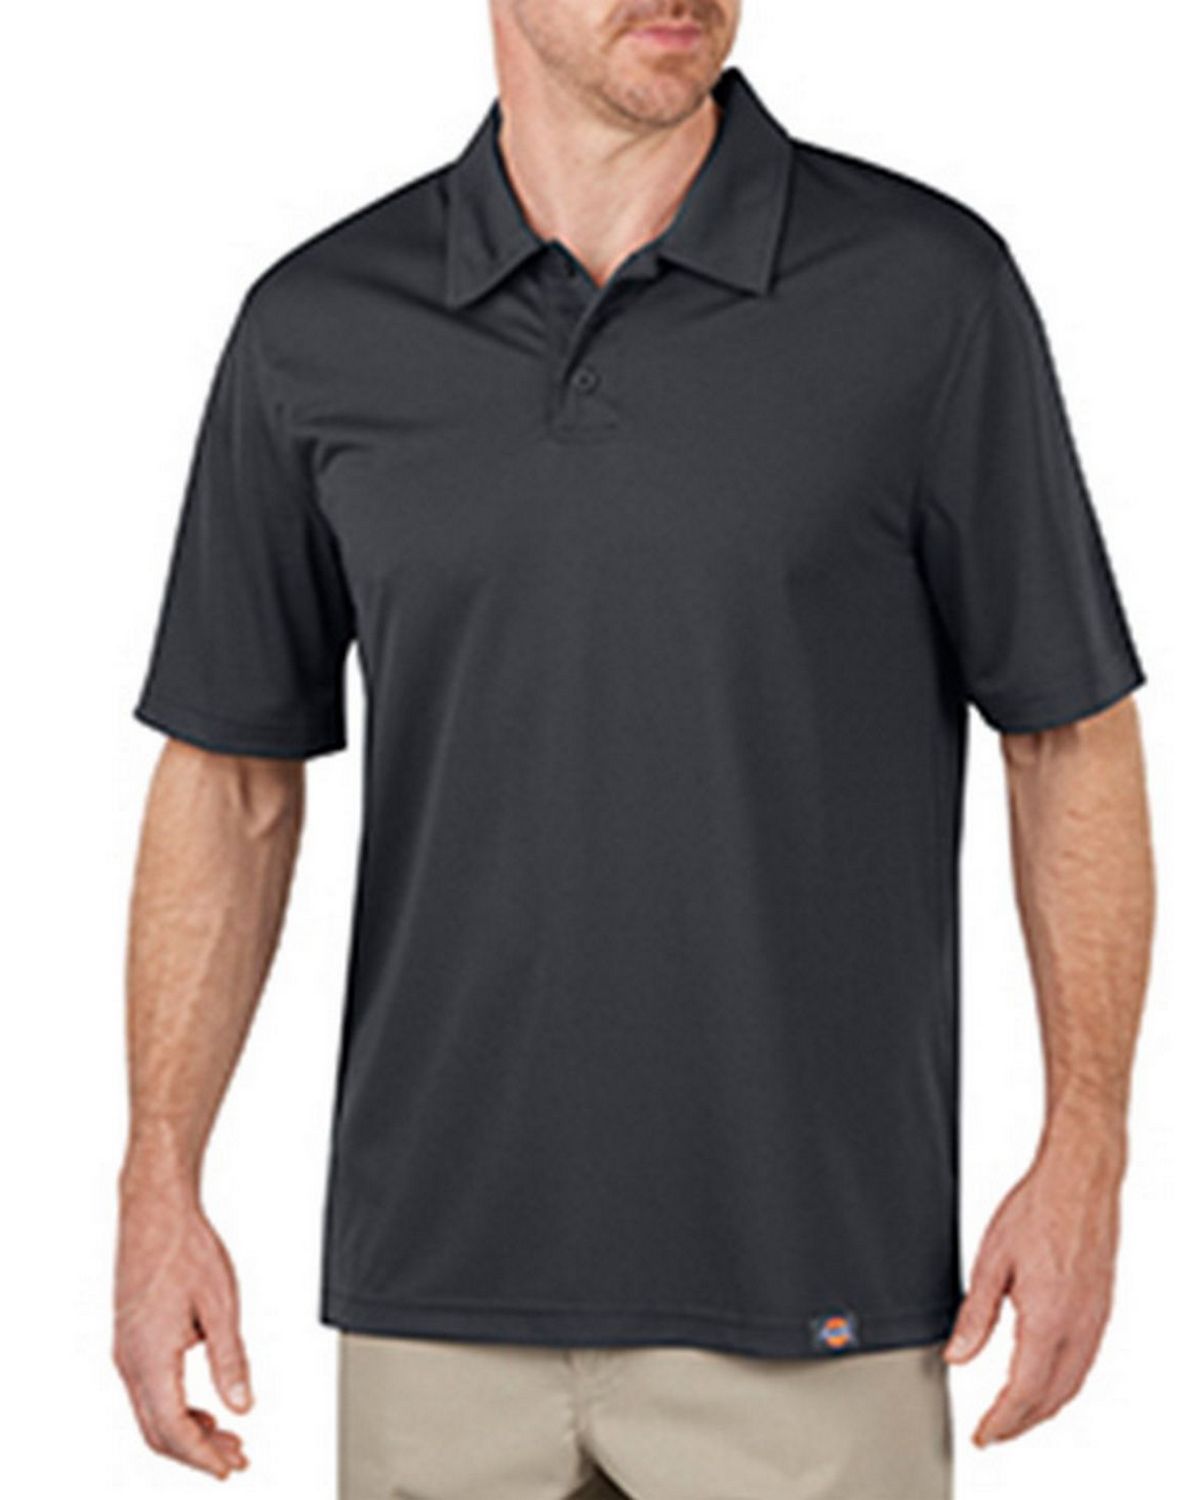 Dickies LS405 Unisex Industrial Performance Polo